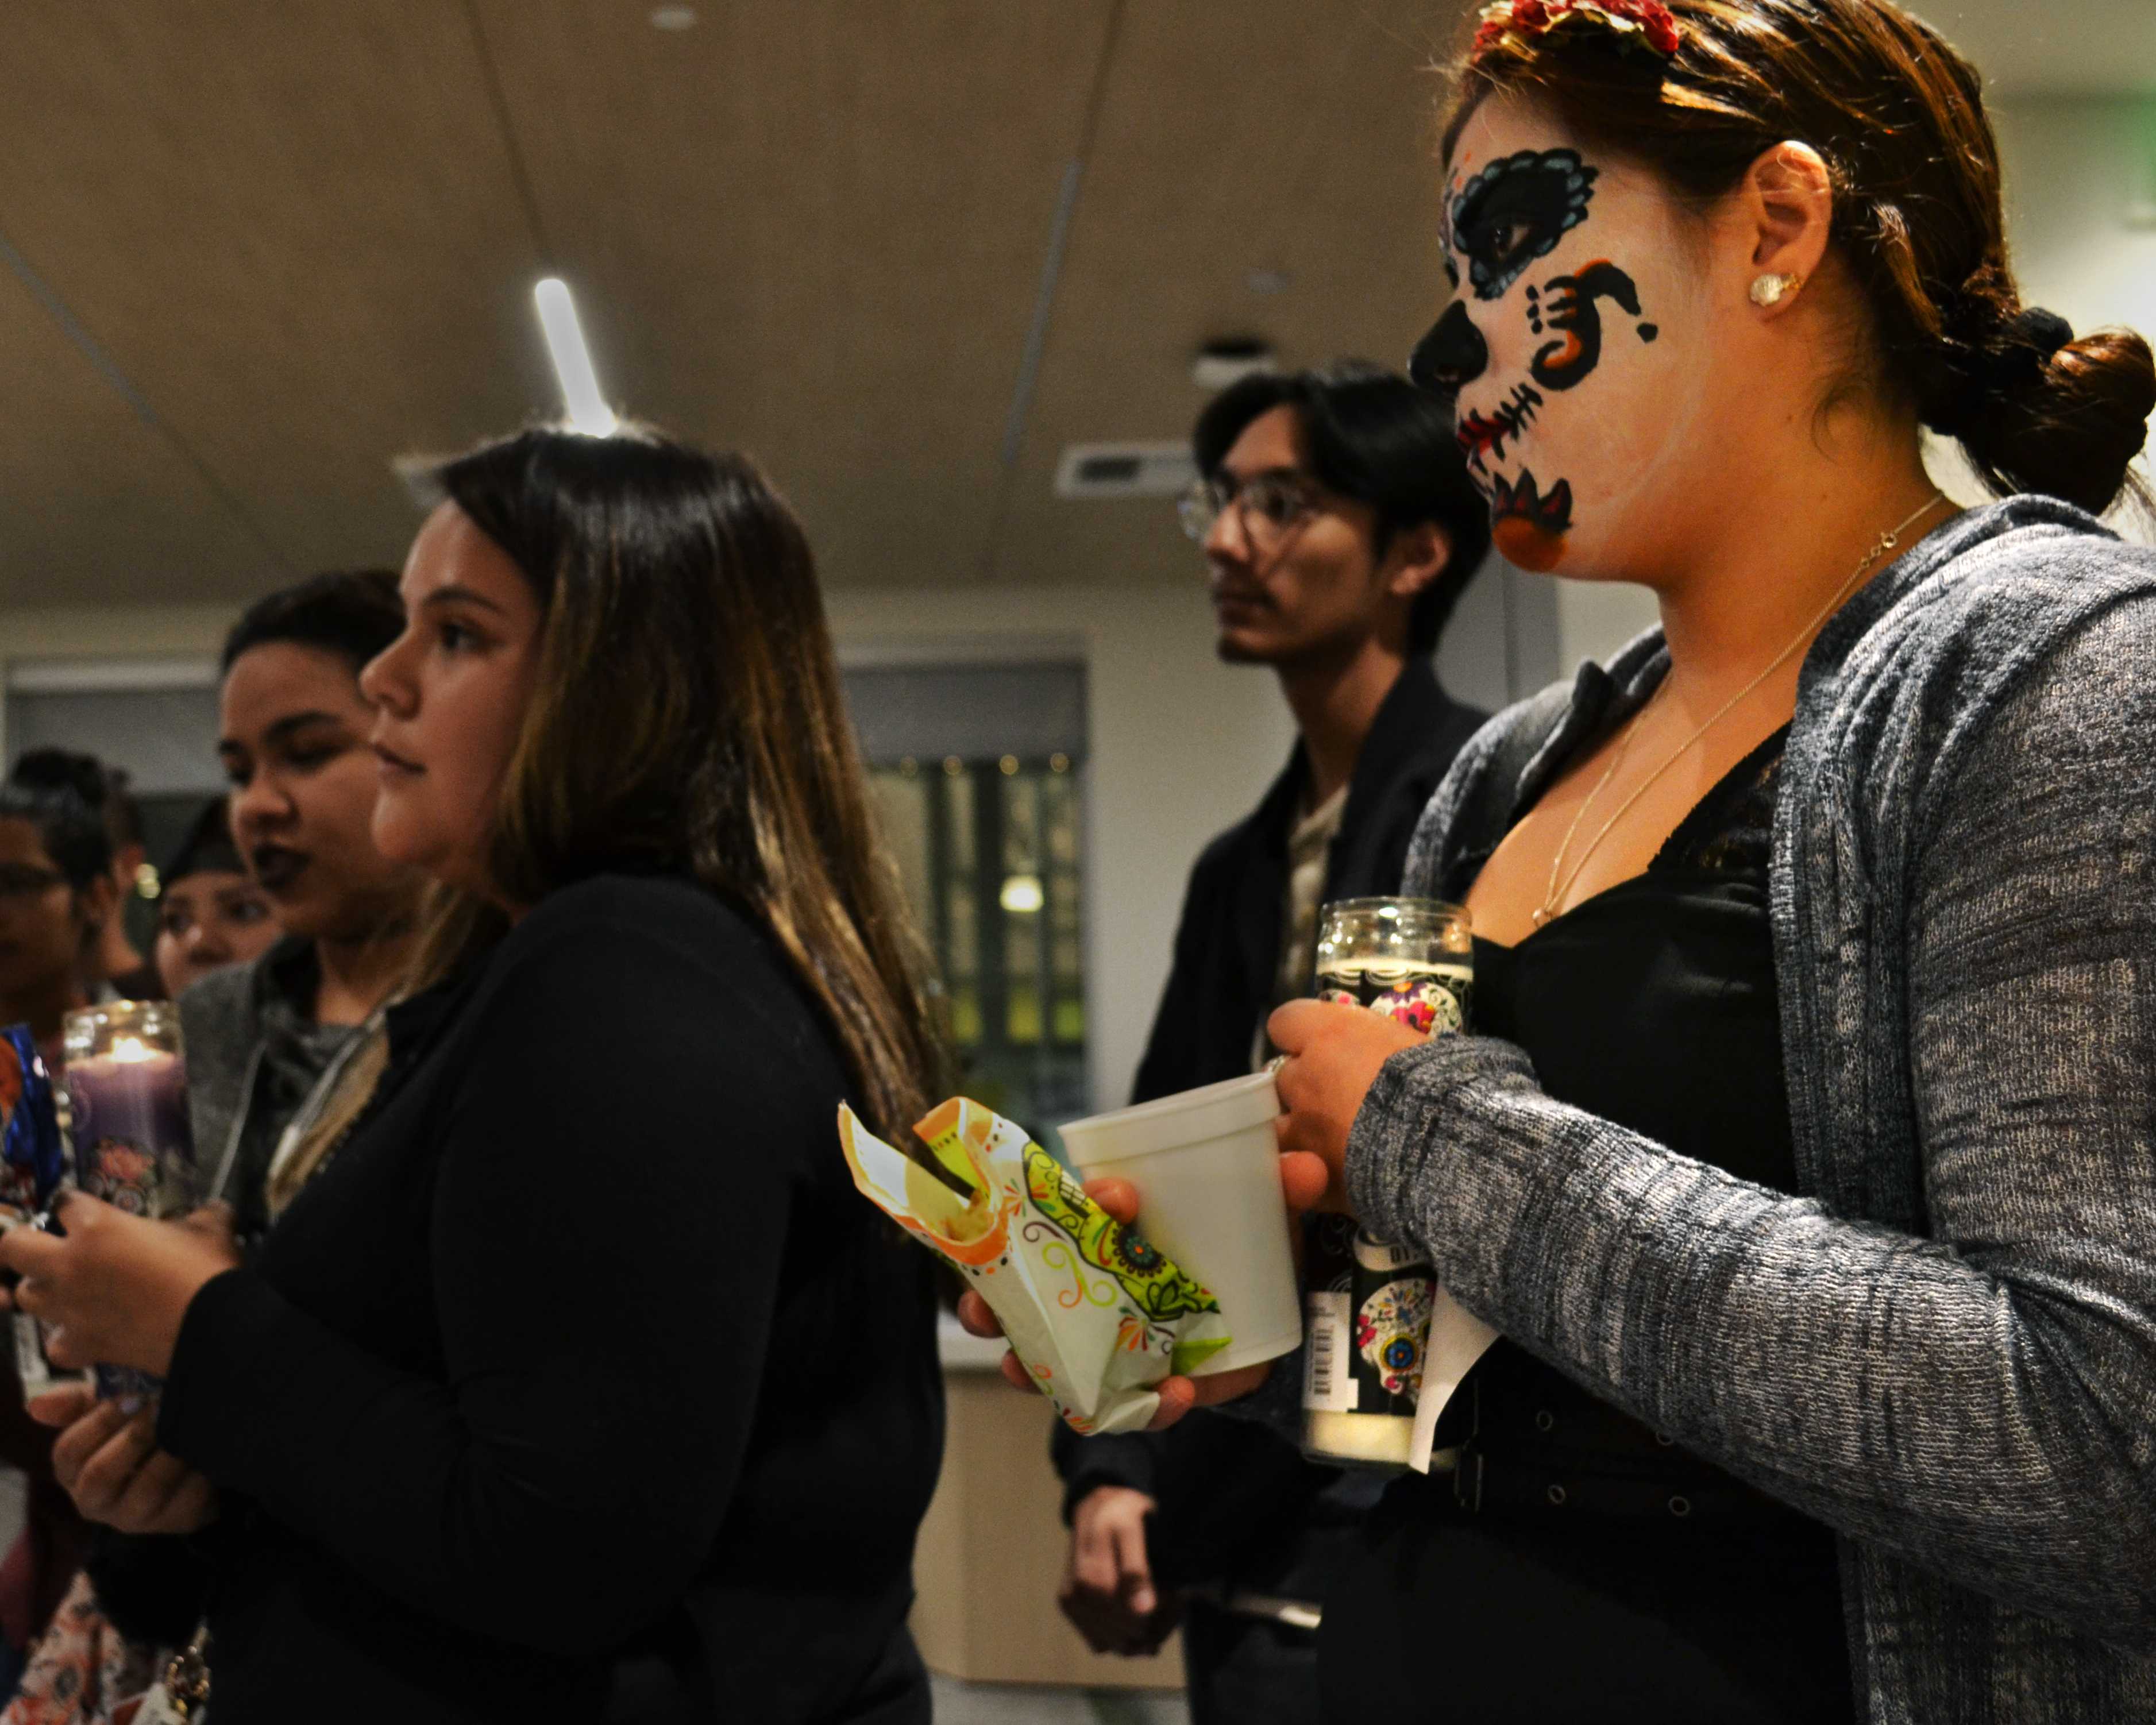 Melissa Arambula (right) looks on as CSUN students pay tribute to the dead in Honor of Dia de Los Muertos at an altar set up by the student group, Latinas Rising, on Wednesday, November  in building 21.

(Eric Licas / The Sundial)